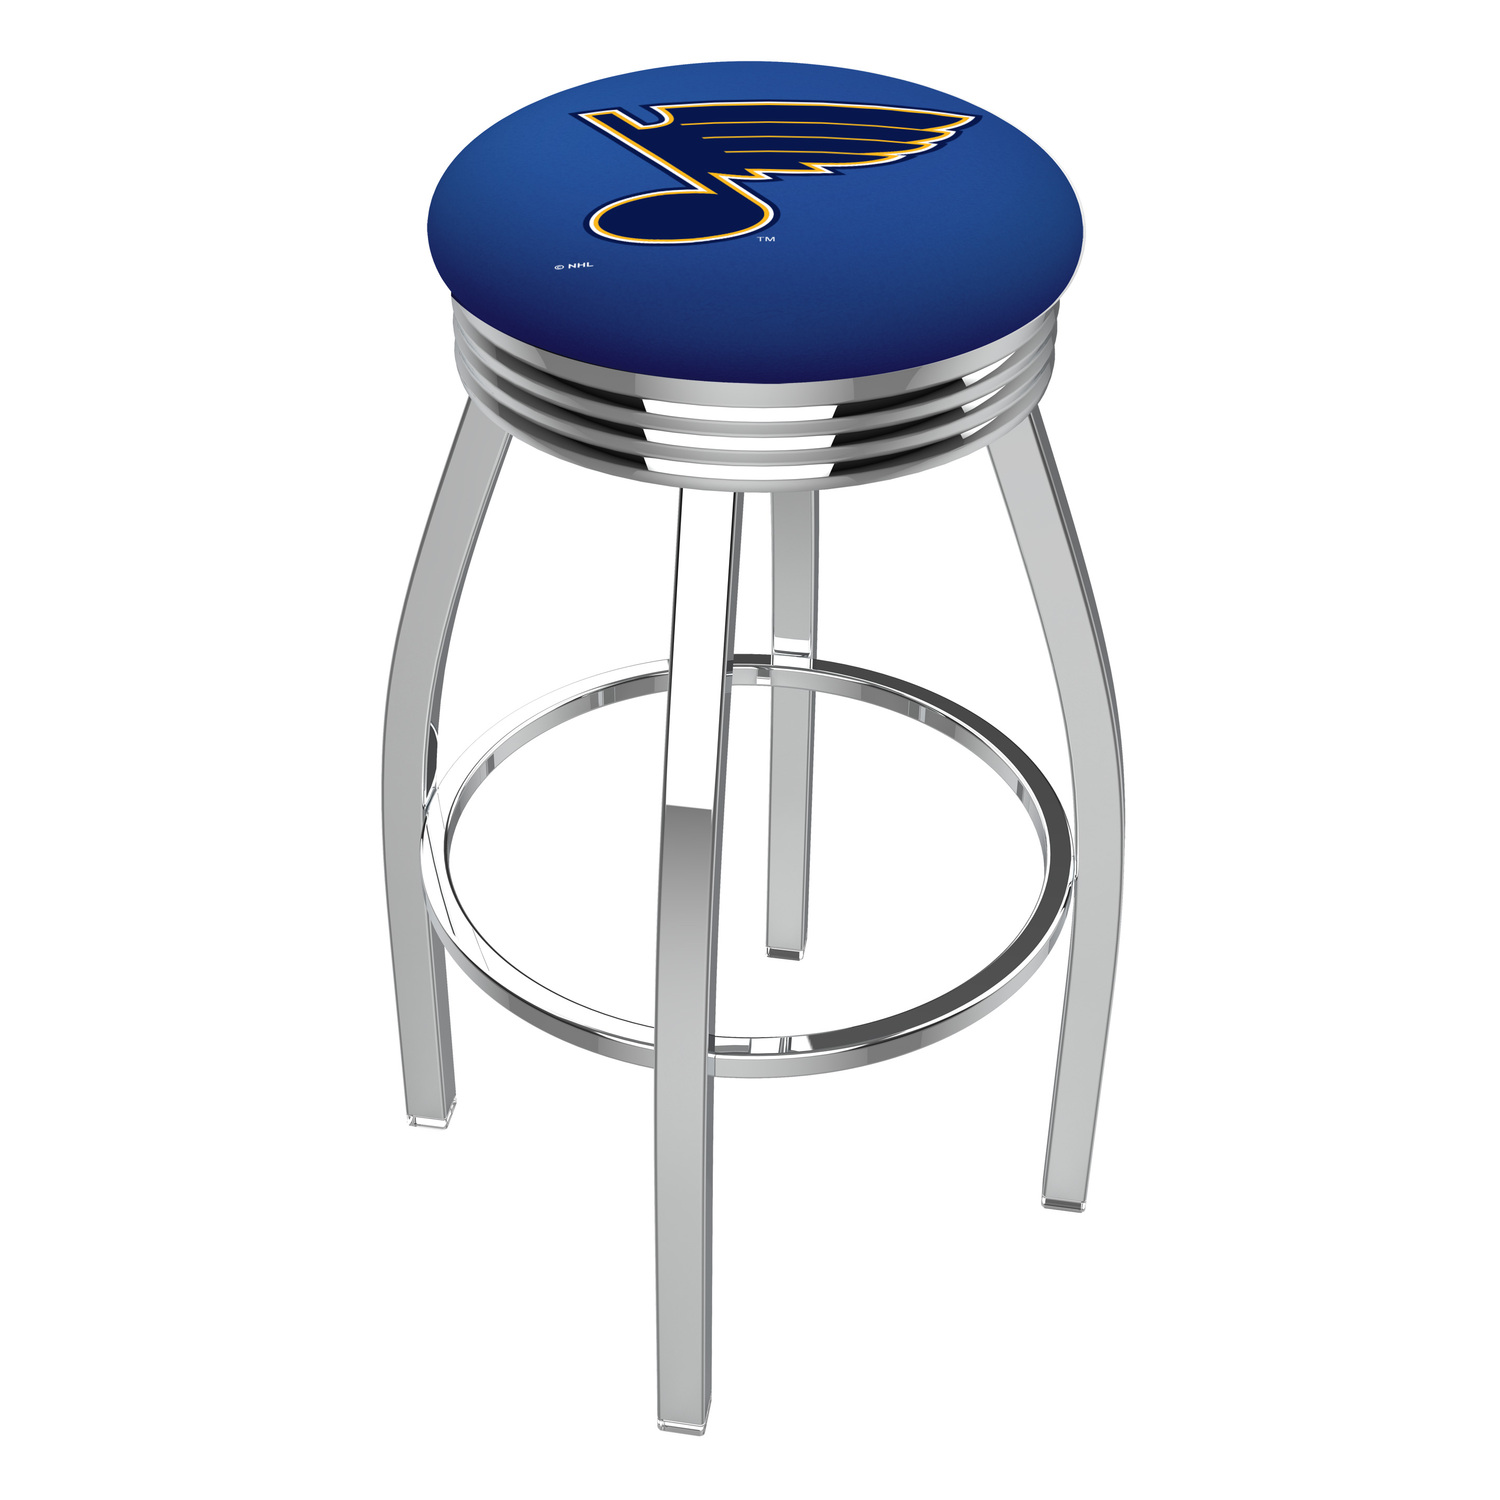 25" L8C3C - Chrome St Louis Blues Swivel Bar Stool with 2.5" Ribbed Accent Ring by Holland Bar Stool Company - image 1 of 2